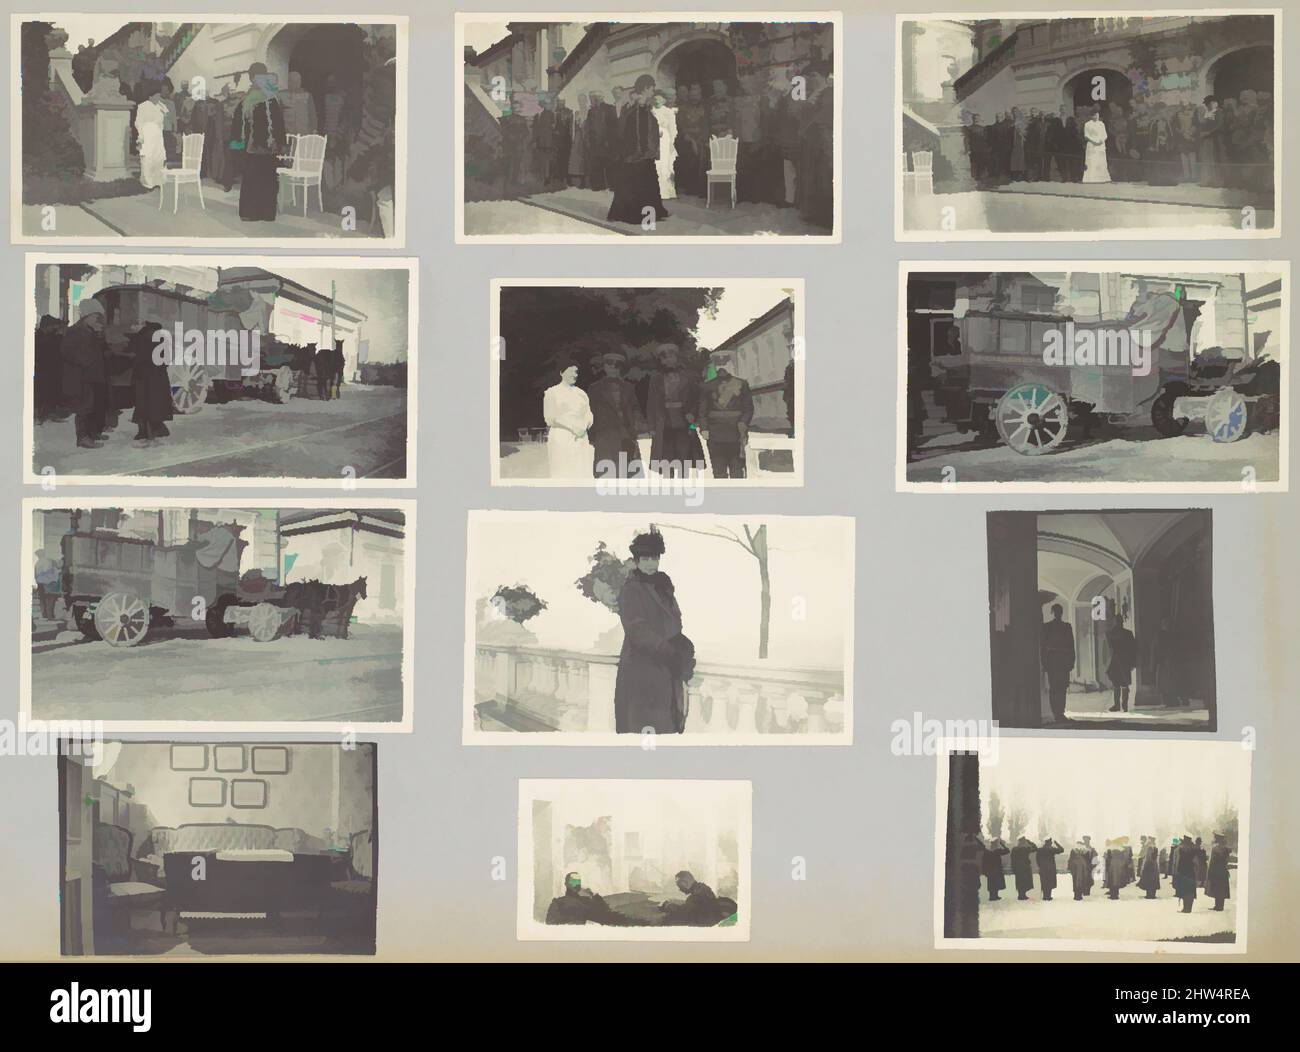 Art inspired by Personal Travel Album Made by the Dowager Empress Maria Feoderovna Showing Events in the Daily Life of the Russian Imperial Family, 1916, Gelatin silver prints; photomechanical prints, 29.5 x 42.2 x 5.7cm (11 5/8 x 16 5/8 x 2 1/4in.) each, Dowager Empress Maria, Classic works modernized by Artotop with a splash of modernity. Shapes, color and value, eye-catching visual impact on art. Emotions through freedom of artworks in a contemporary way. A timeless message pursuing a wildly creative new direction. Artists turning to the digital medium and creating the Artotop NFT Stock Photo